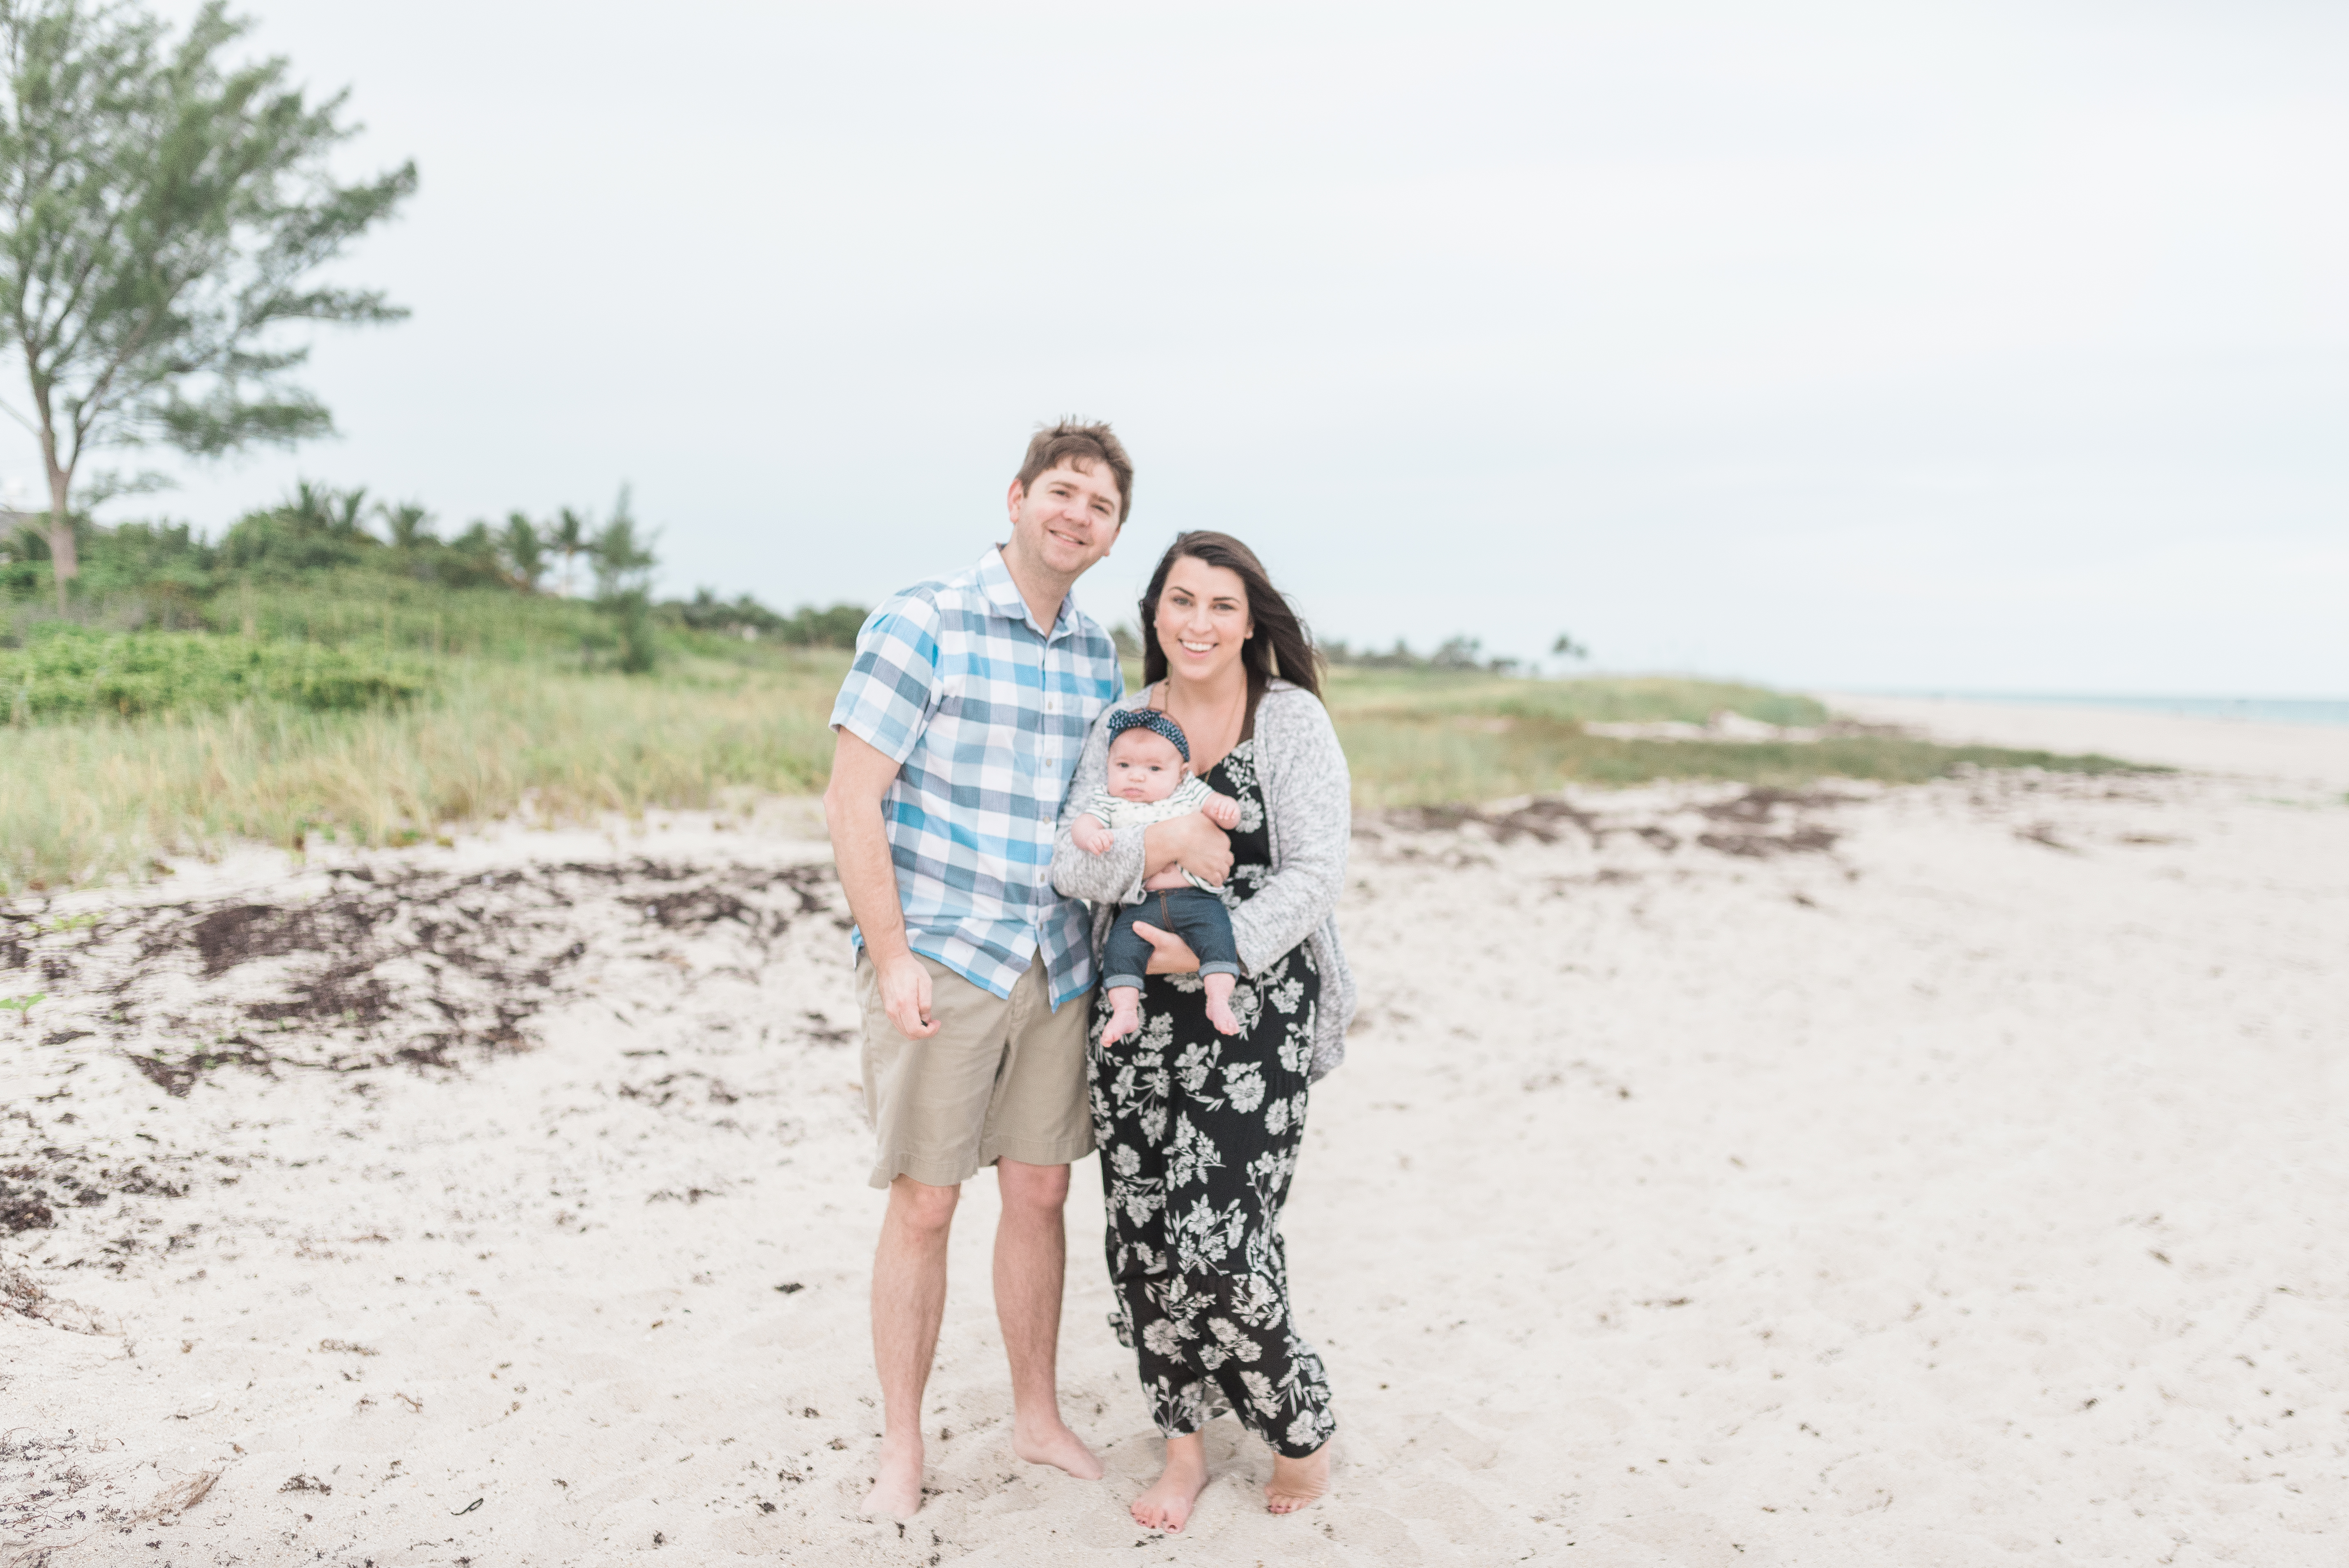 John and Brittney Naylor standing together holding daughter on the beach in Vero Beach